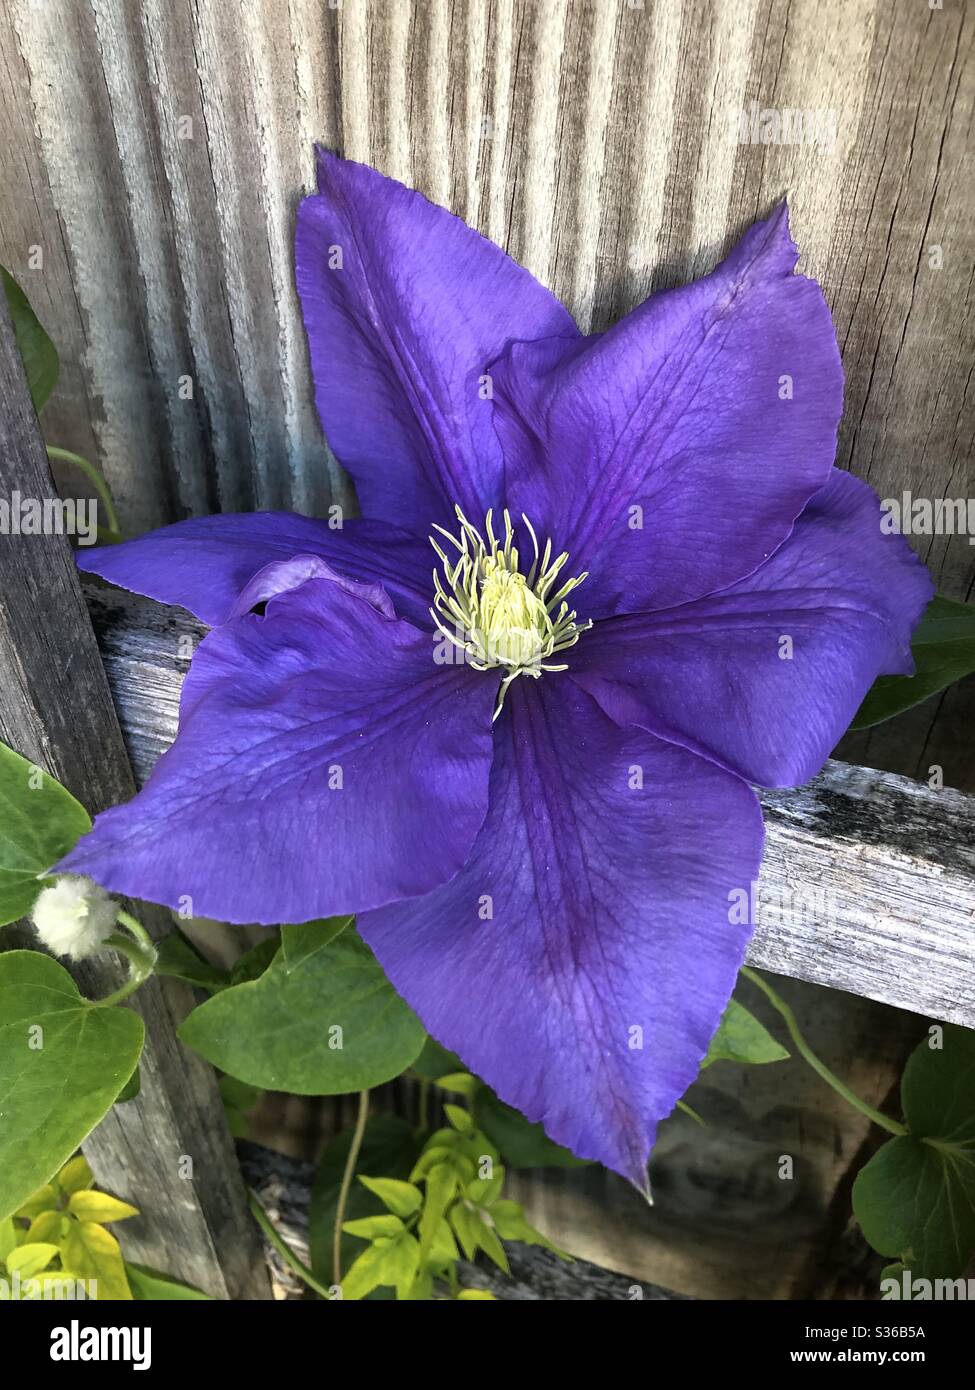 Stunning purple clematis flower in full bloom early summer Stock Photo